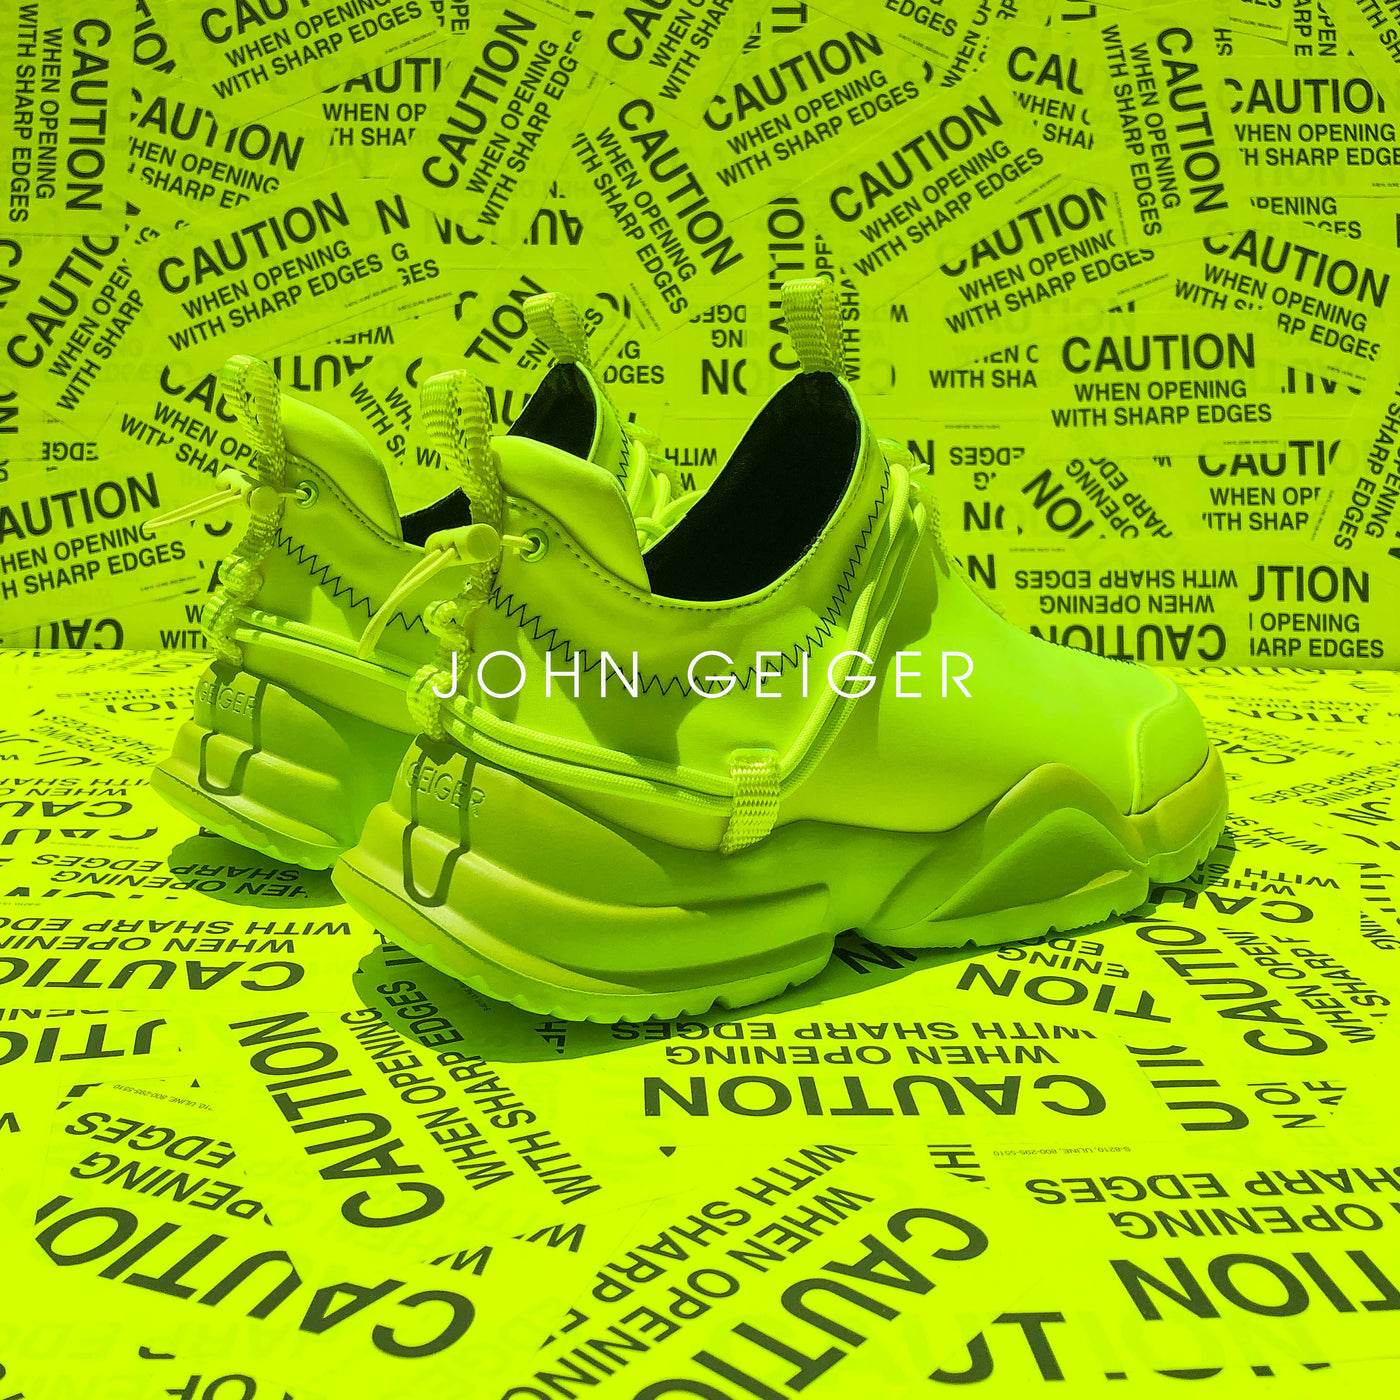 Limited Re-Release of All 3 Highlighter 002 Low by John Geiger